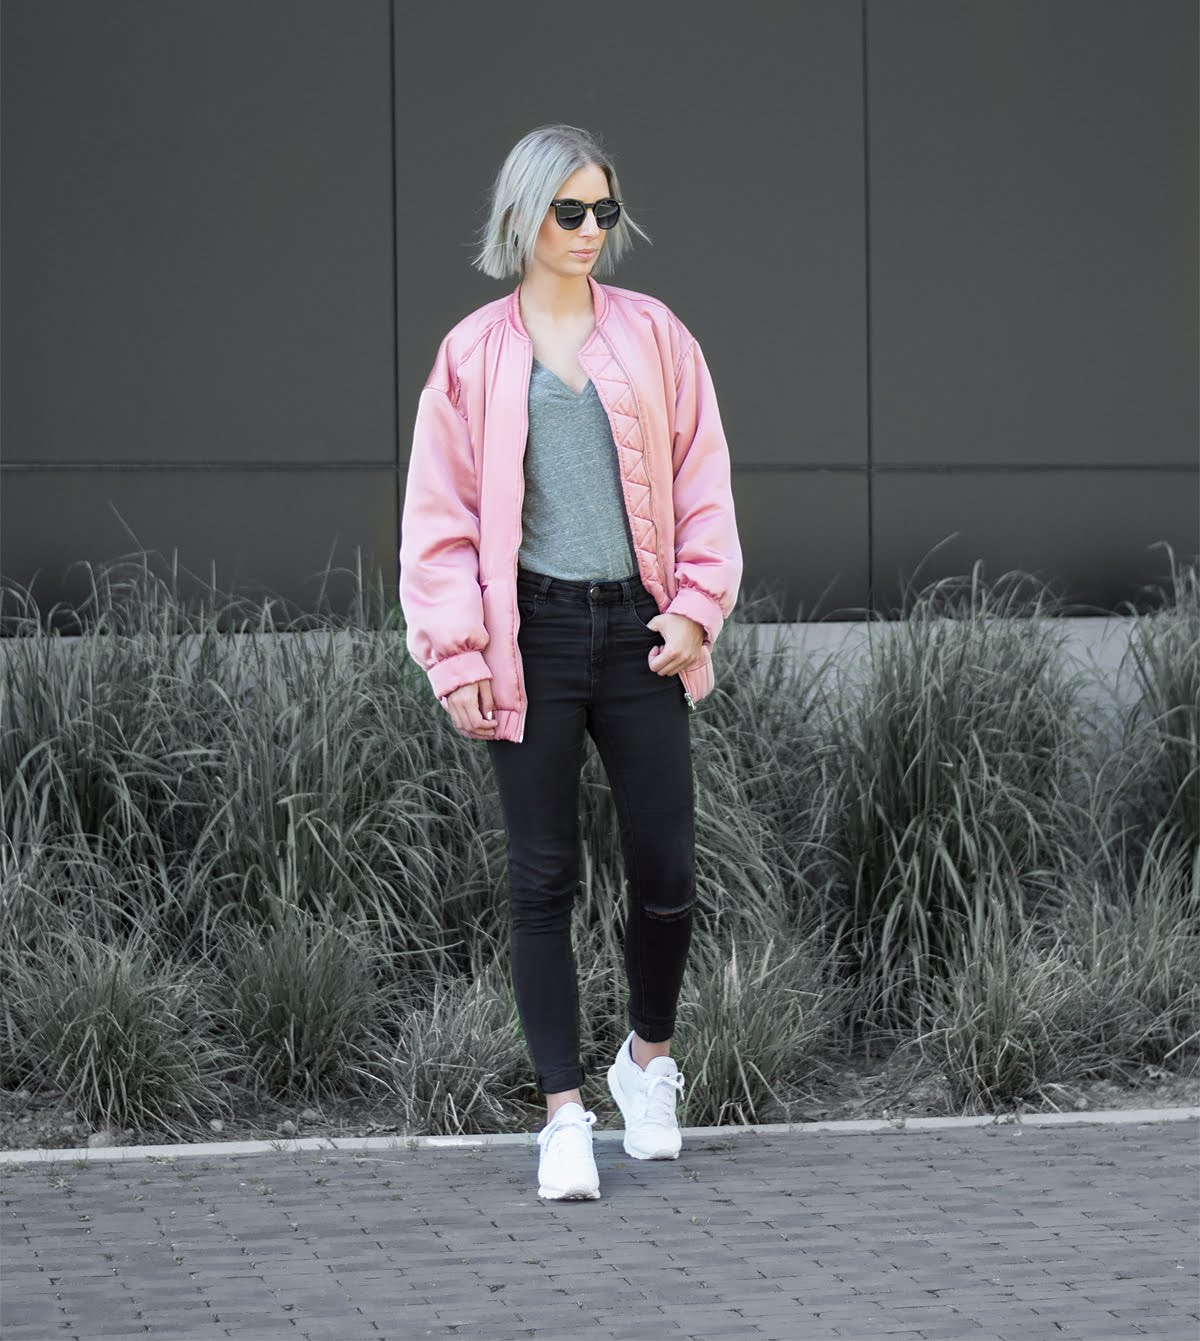 Mango pink satin oversized bomber jacket, h&m divided basic v neck tshirt in grey, asos ridley skinny jeans, reebok classic white sneakers, outfit